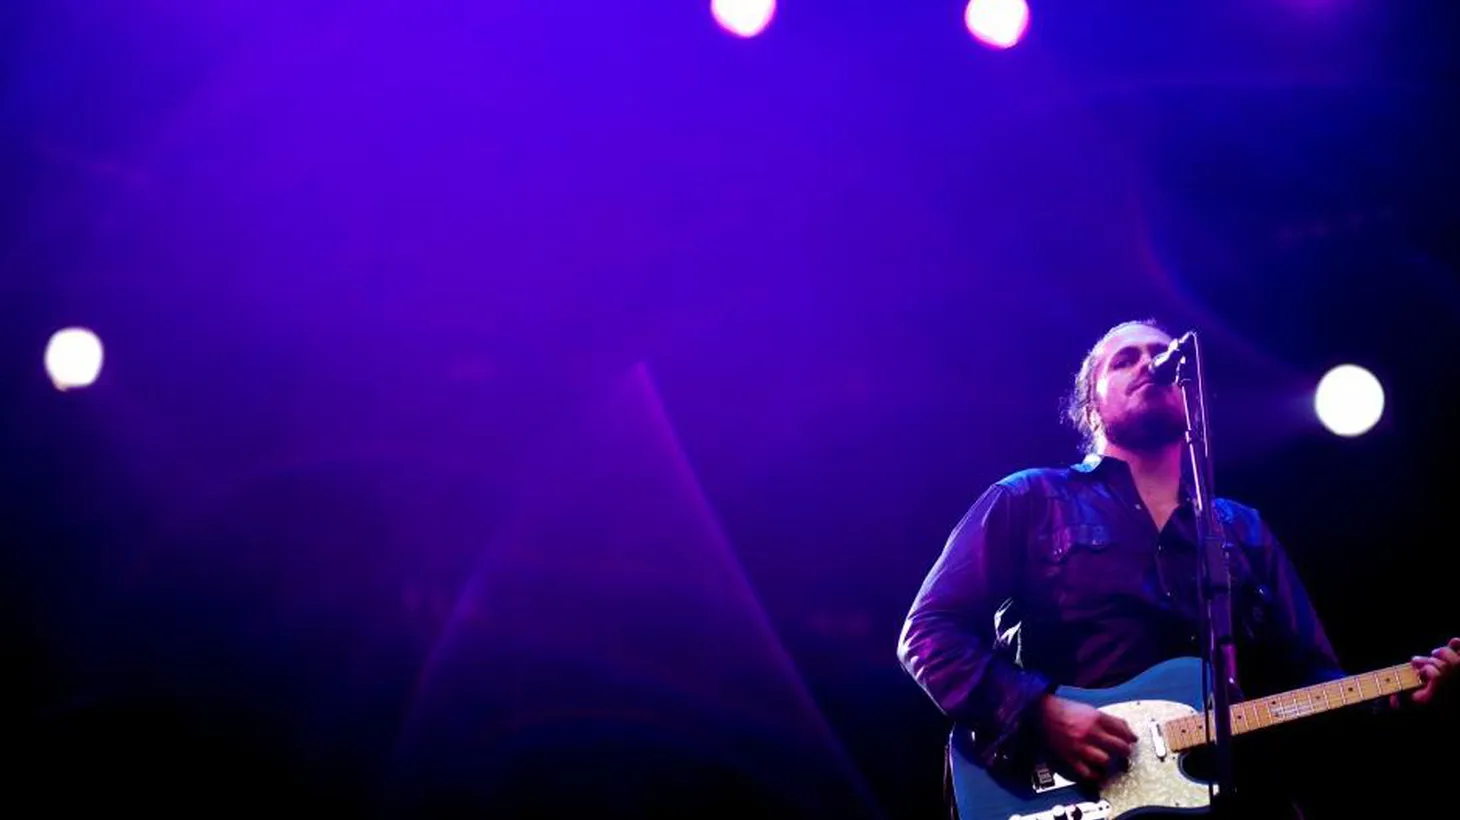 A soulful singer with a positive message, Citizen Cope returns to spread the love and share new songs...